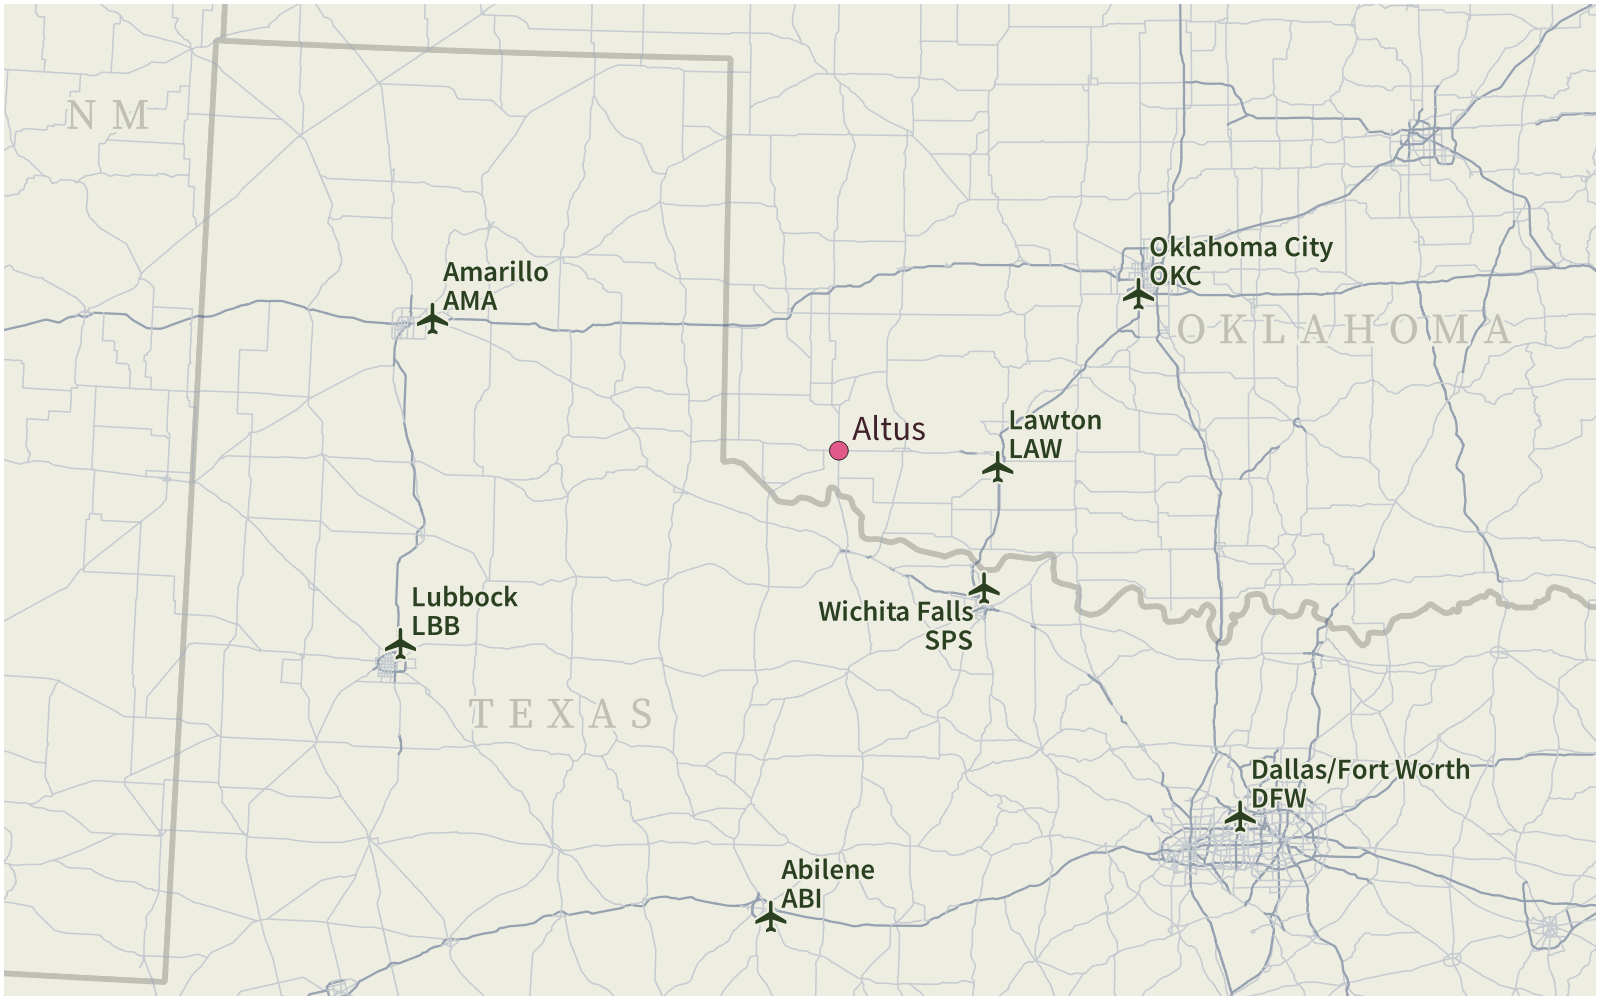 Map of Oklahoma and north Texas, showing the city of Altus, Oklahoma, and the Amarillo, Lubbock, Oklahoma City, Lawton, Wichita Falls, Abilene, and Dallas/Fort Worth airports.